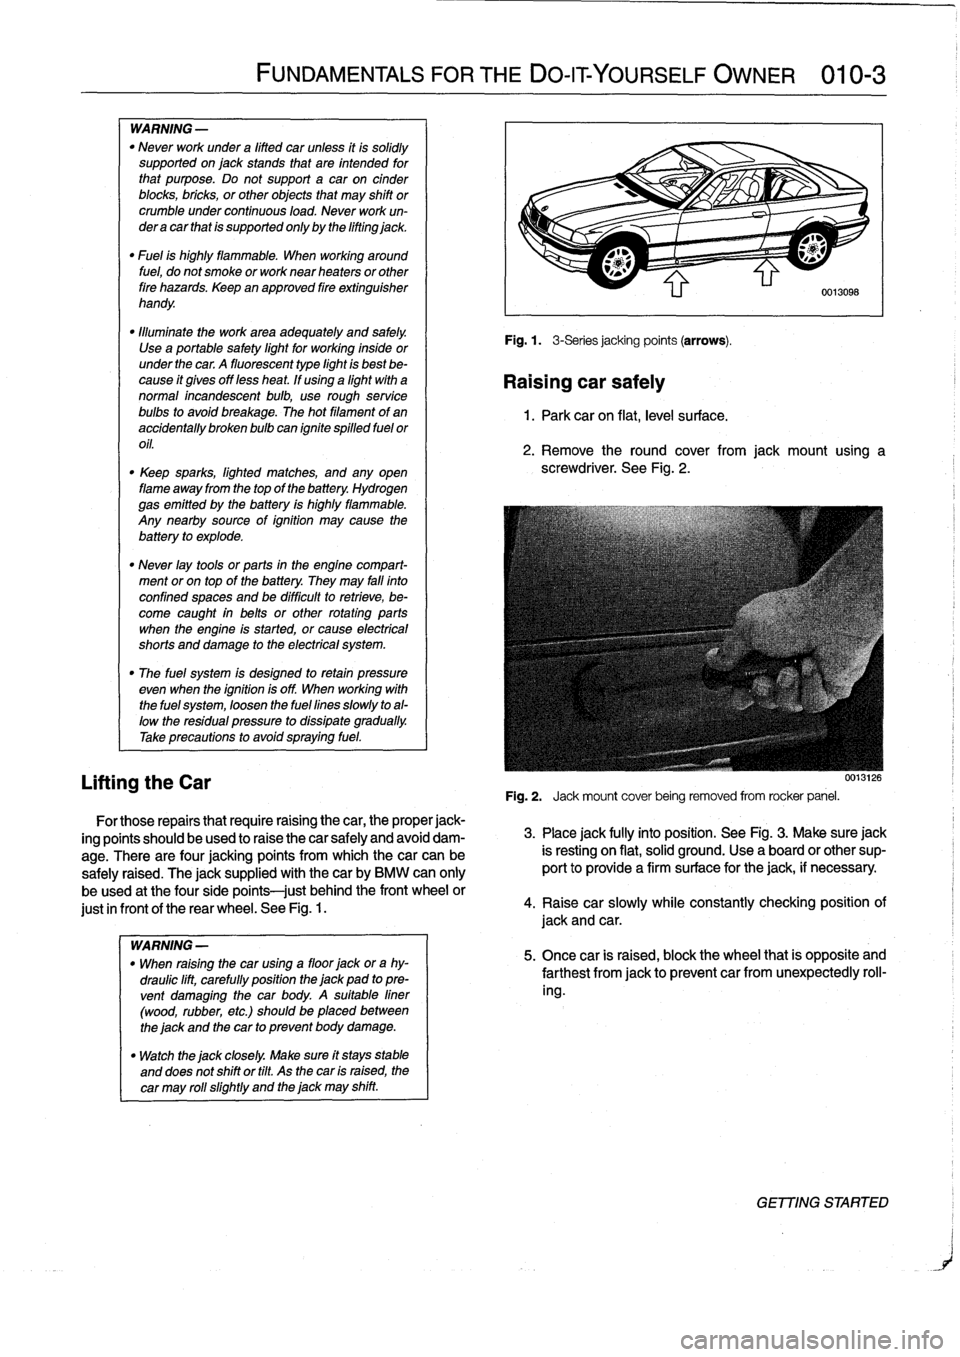 BMW 328i 1994 E36 Workshop Manual 
WARNING
-

"
Never
work
under
a
lifted
car
unless
it
is
solidly
supported
on
jack
stands
that
are
intended
for
that
purpose
.
Do
not
support
a
car
on
cinder
blocks,
bricks,
or
other
objects
that
may
